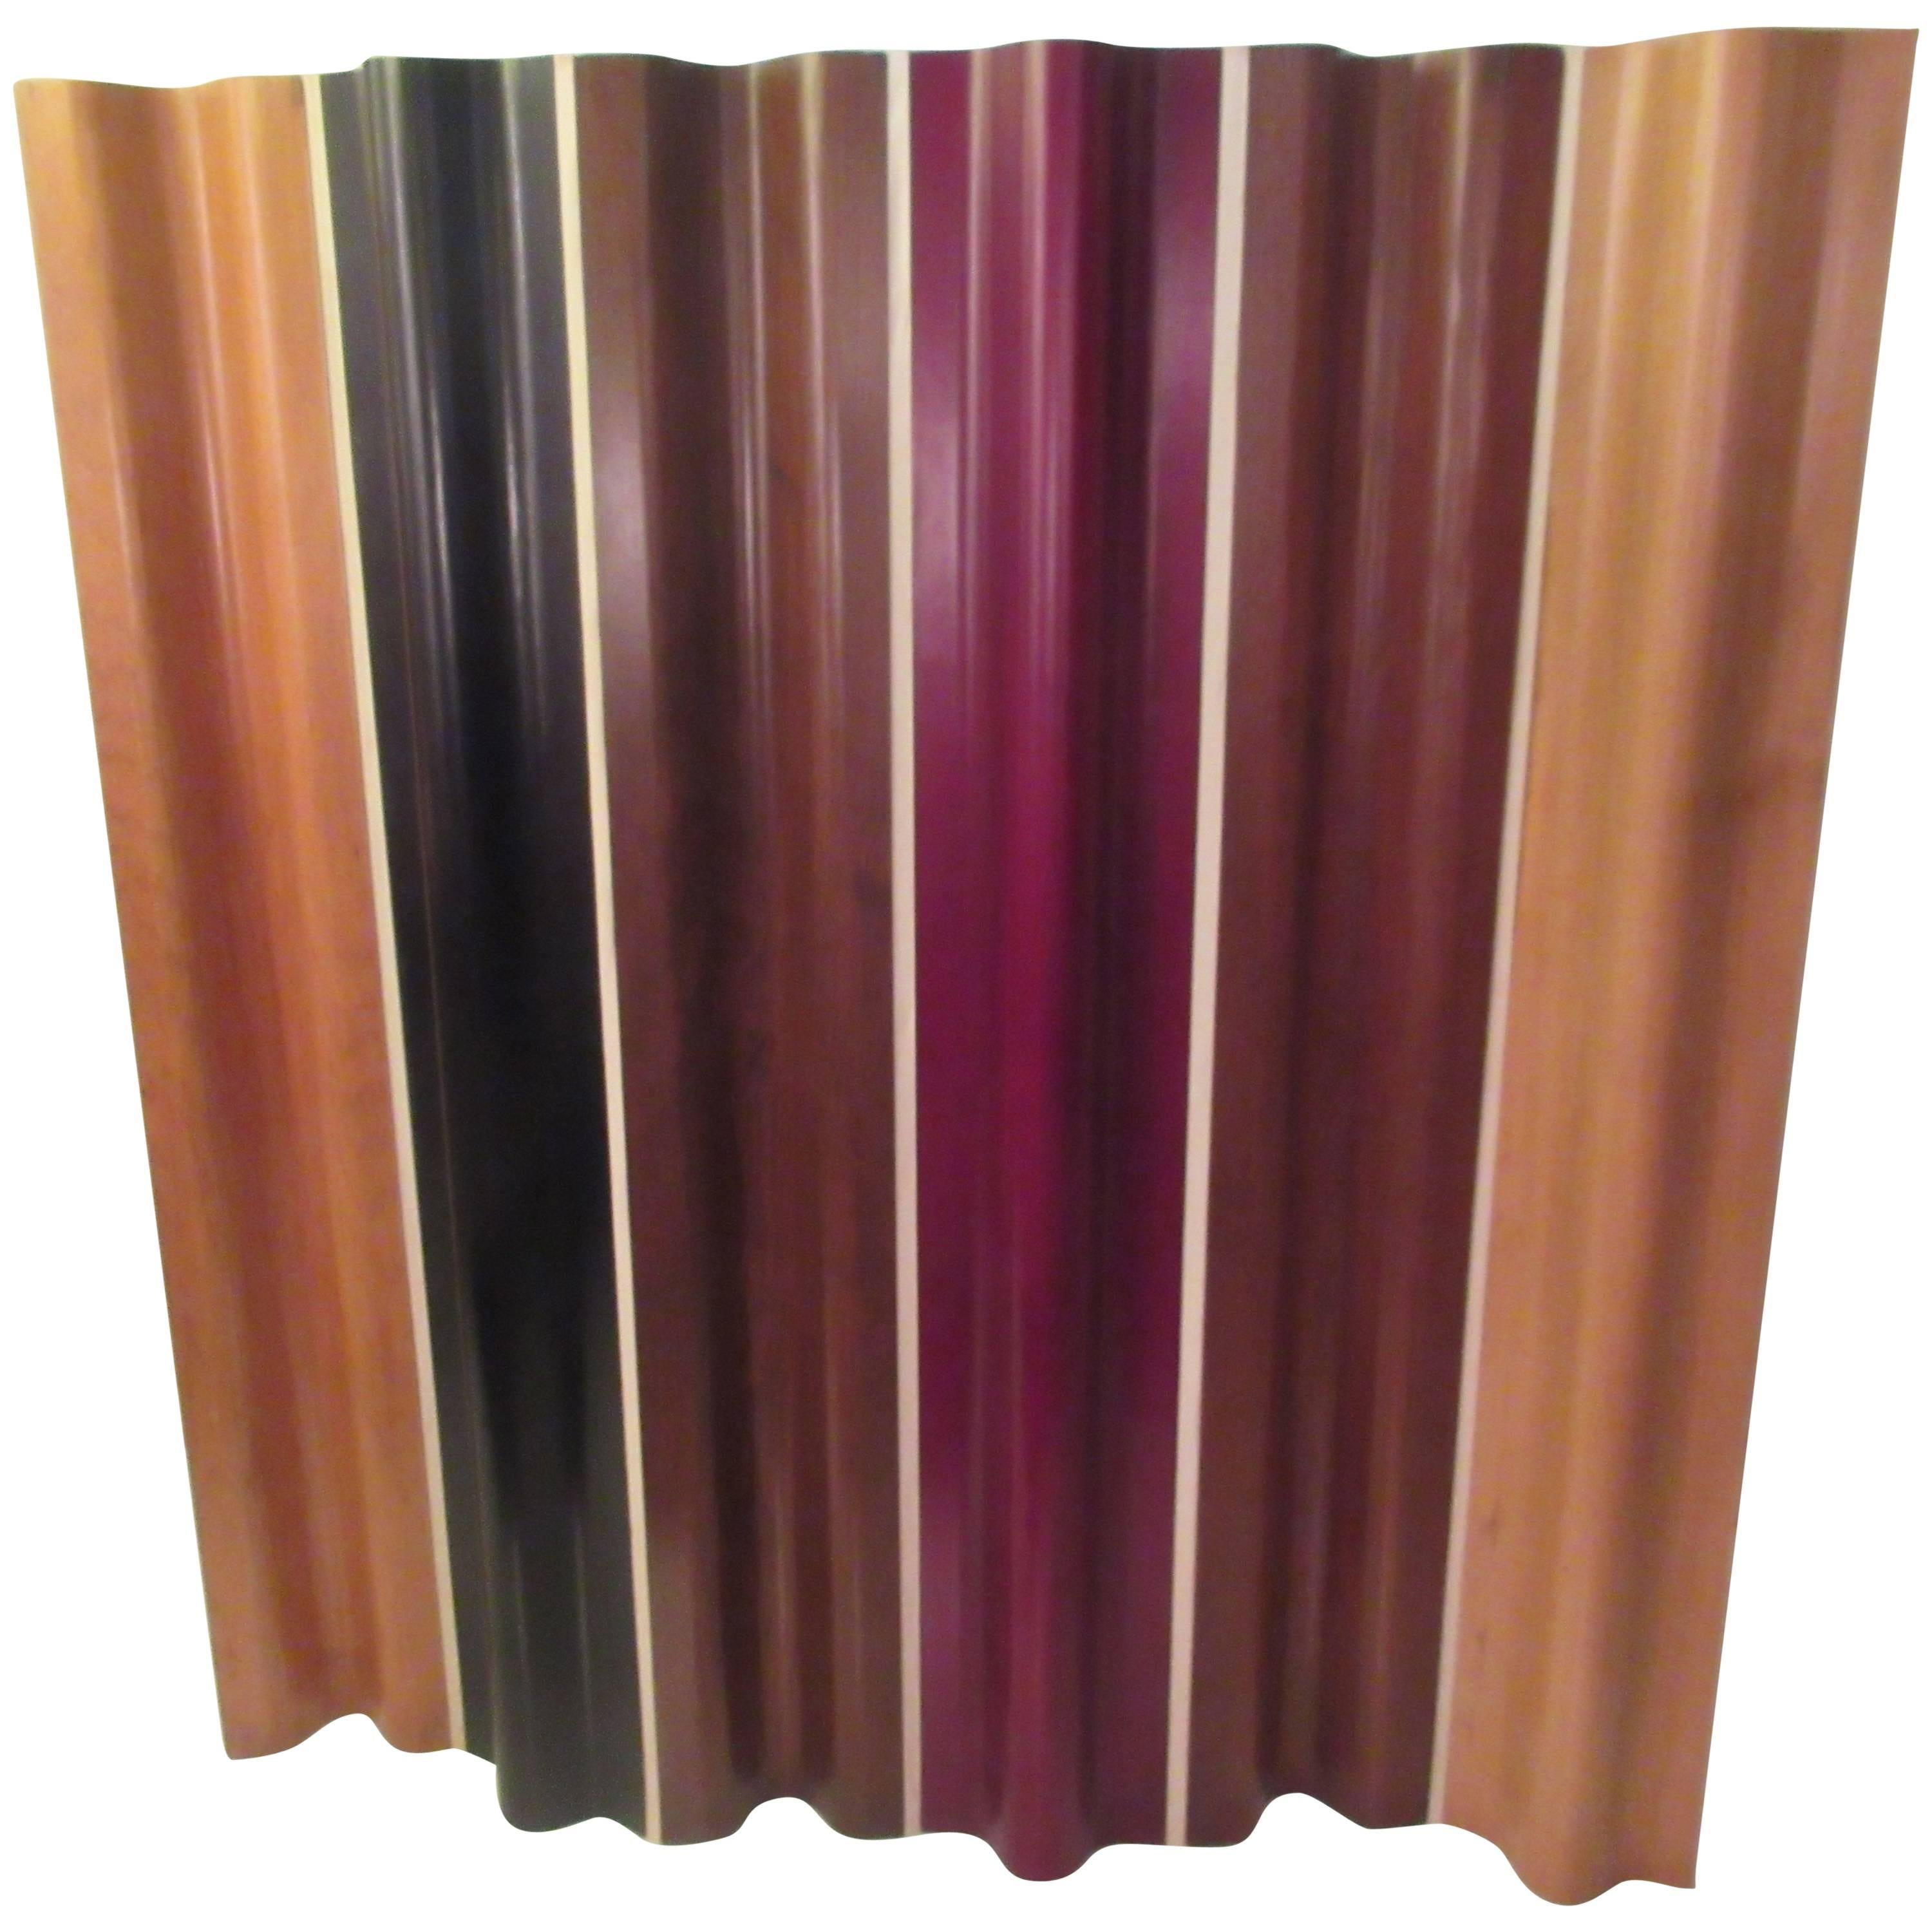 Charles Eames for Herman Miller Plywood Folding Screen